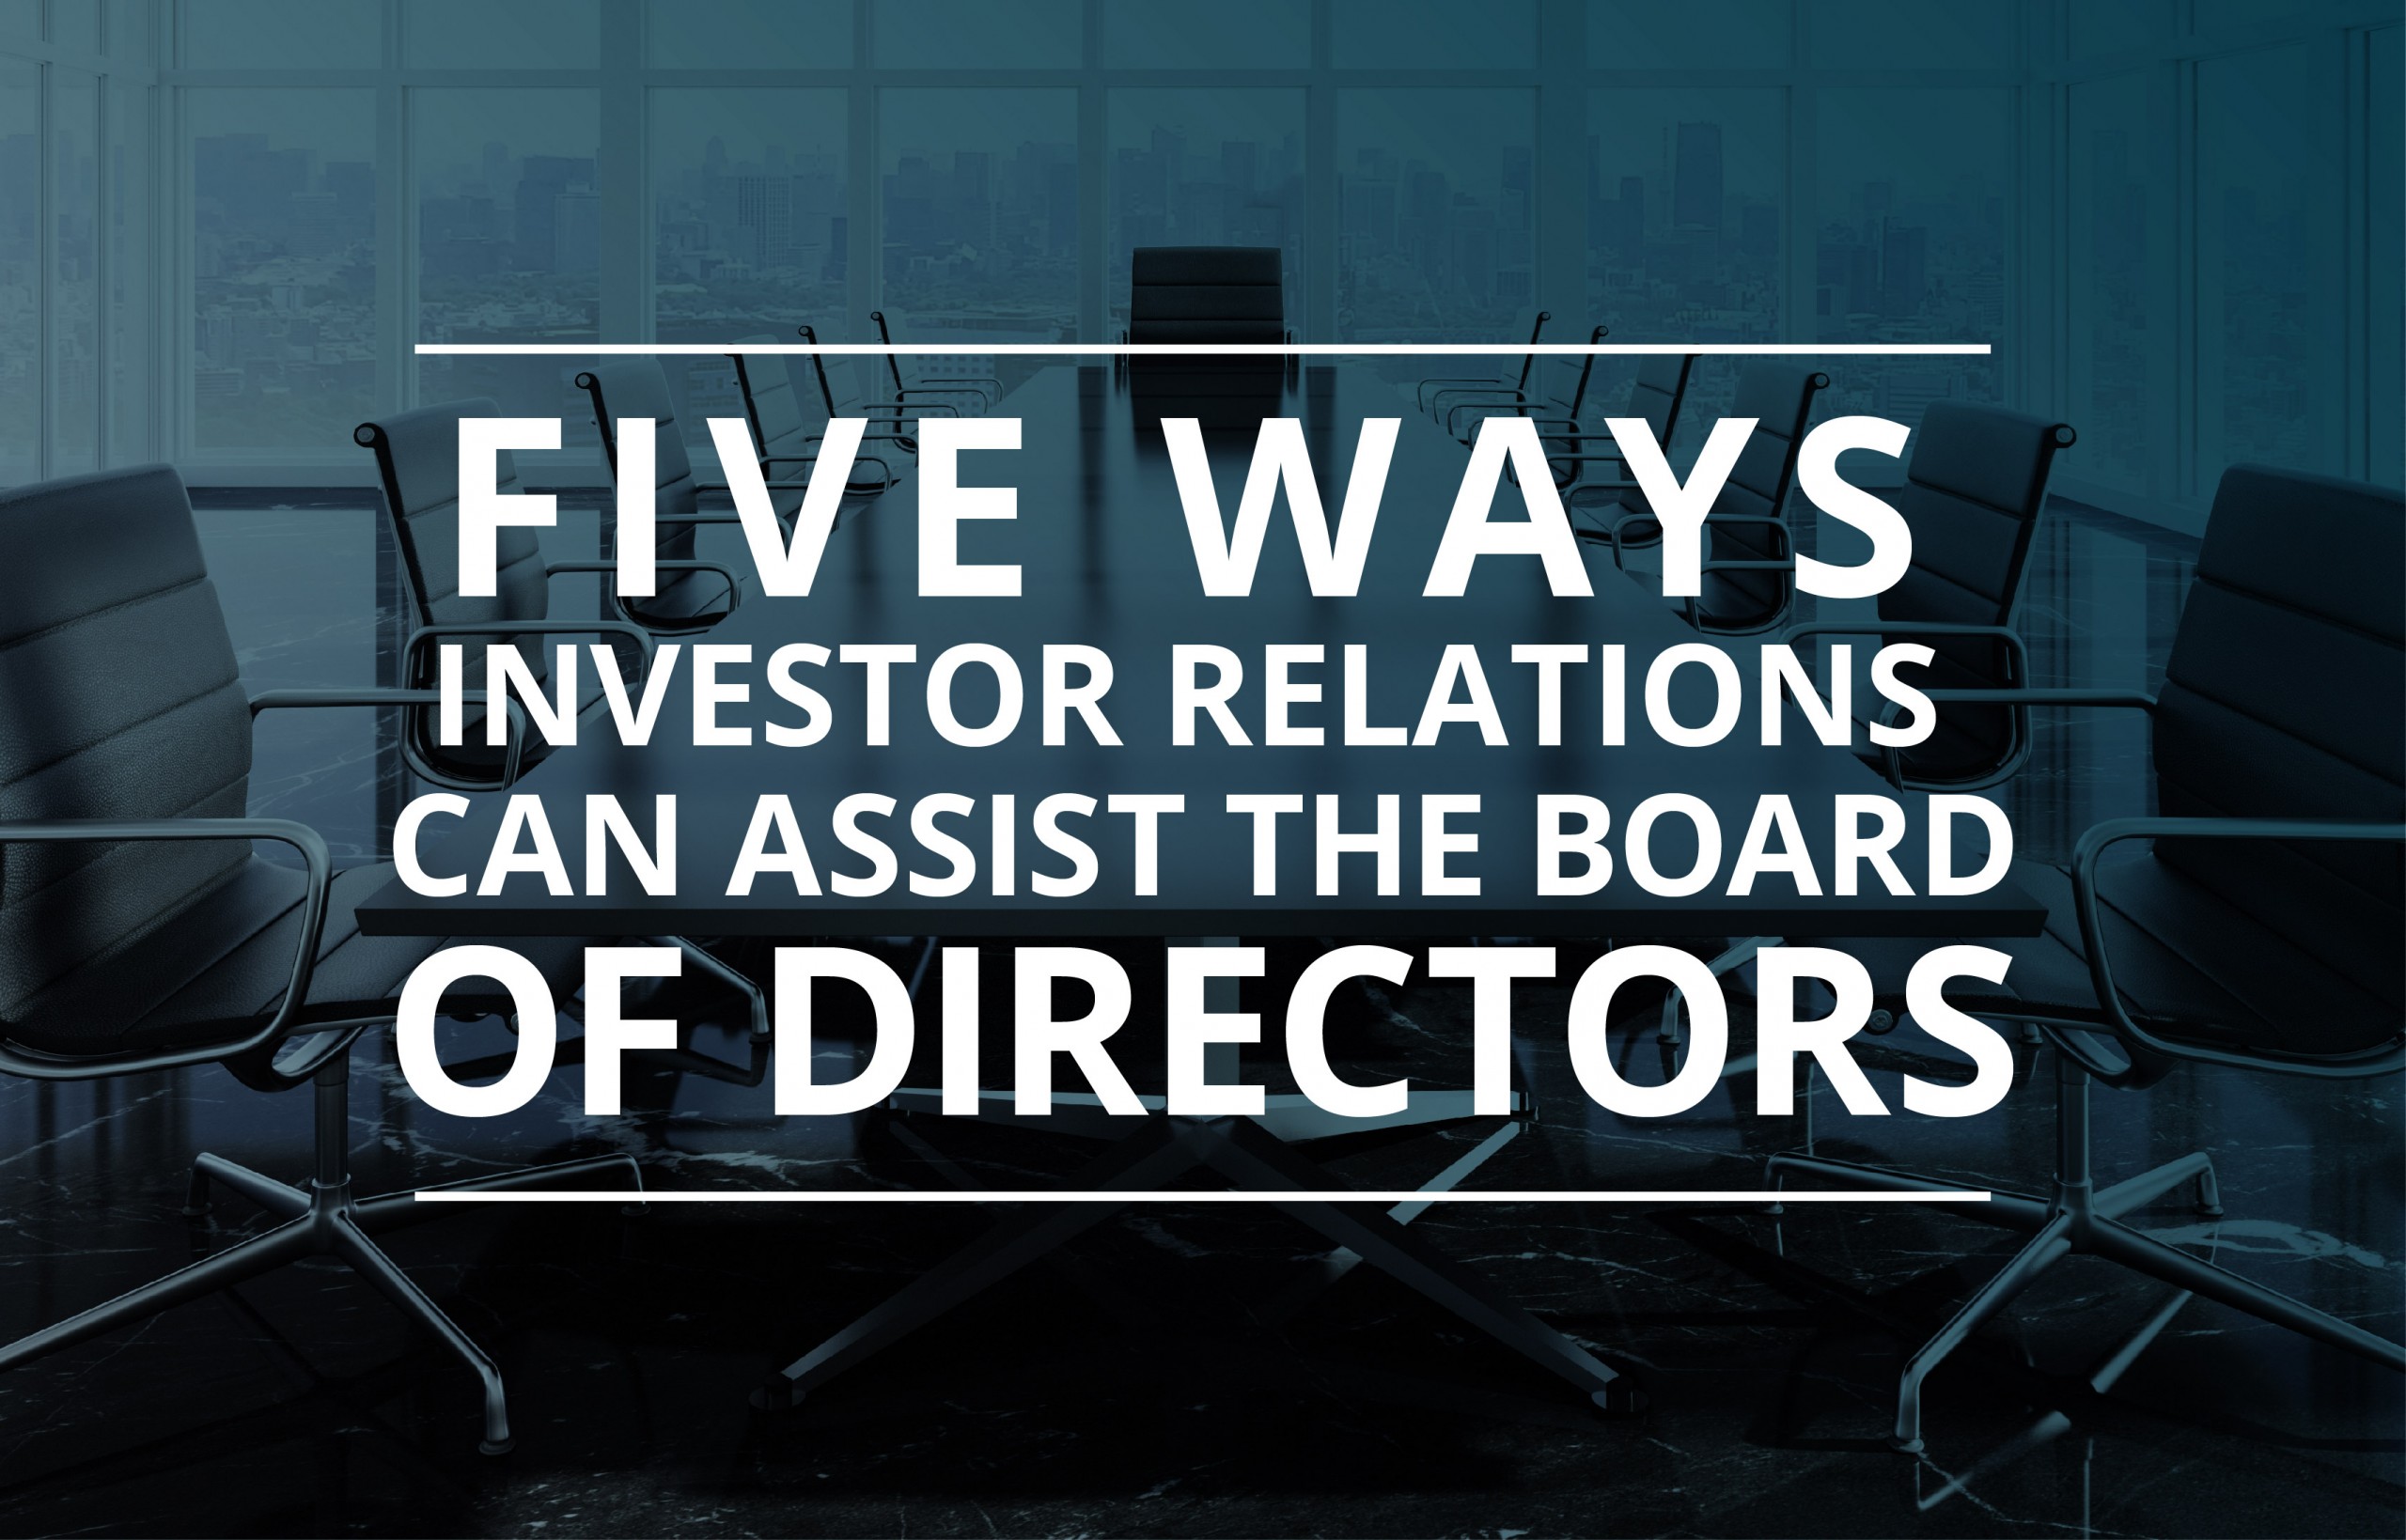 image for Five Ways Investor Relations Can Assist the Board of Directors